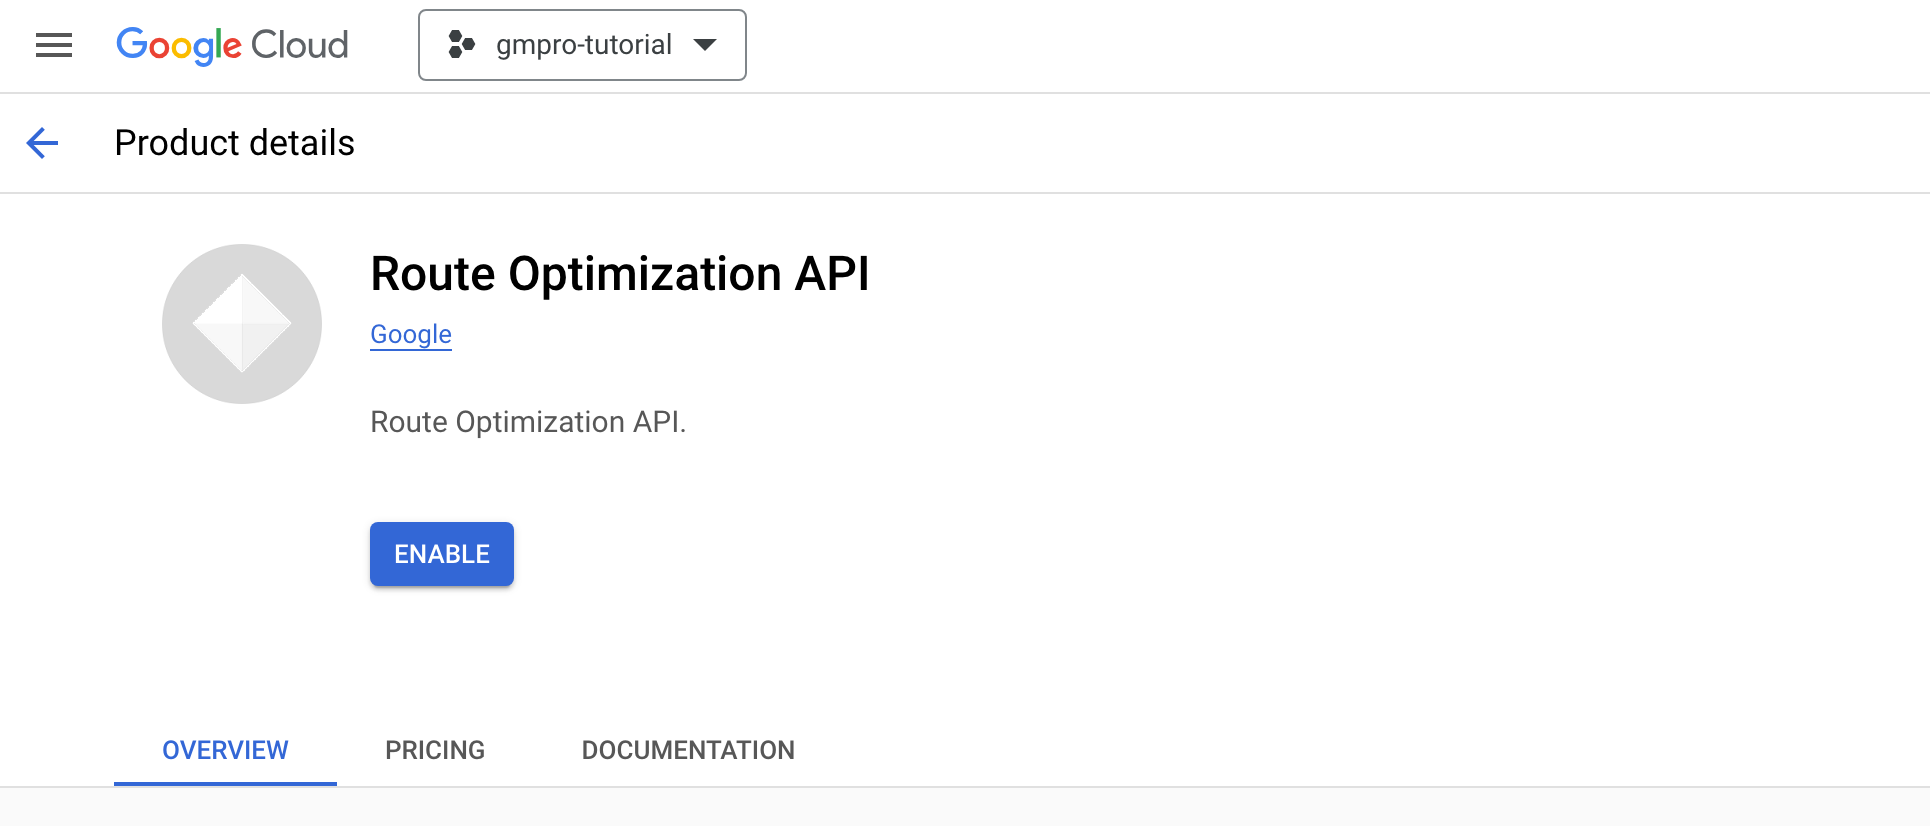 Enabling GMPRO route optimization API on your Google Cloud project